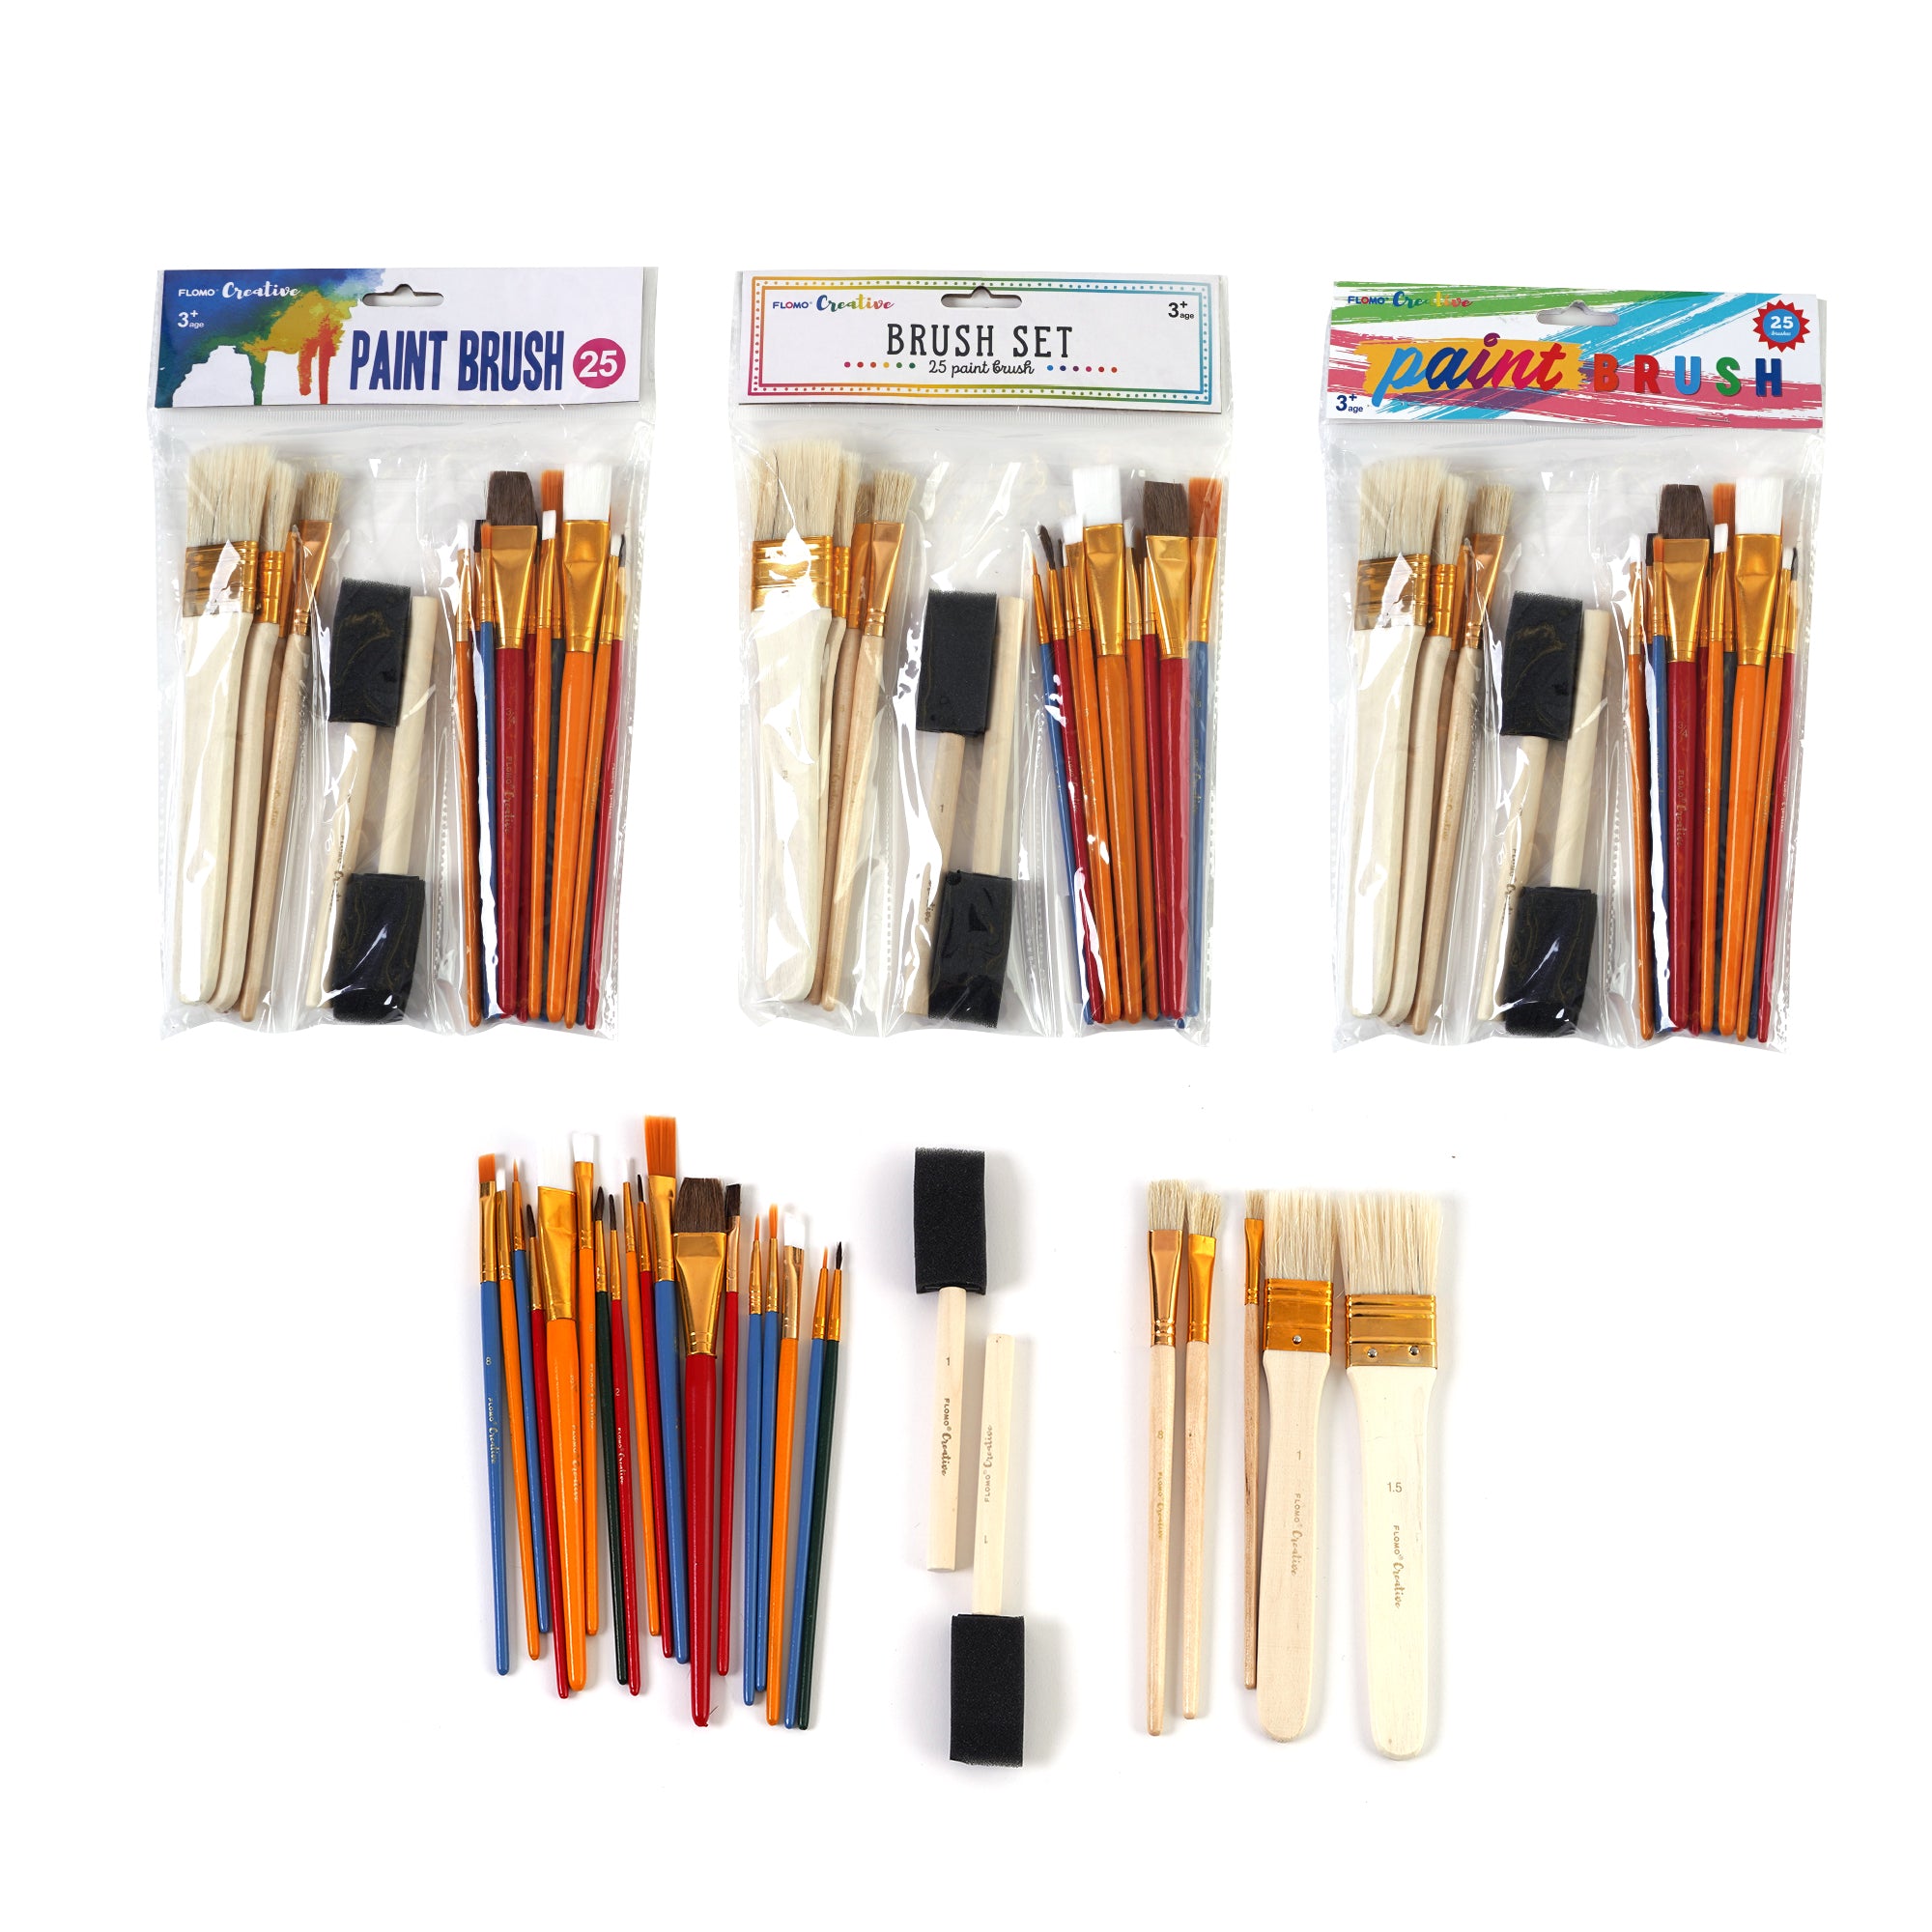 20 Pcs Flat Paint Brushes for Touch Up for Classroom Crafts Paint